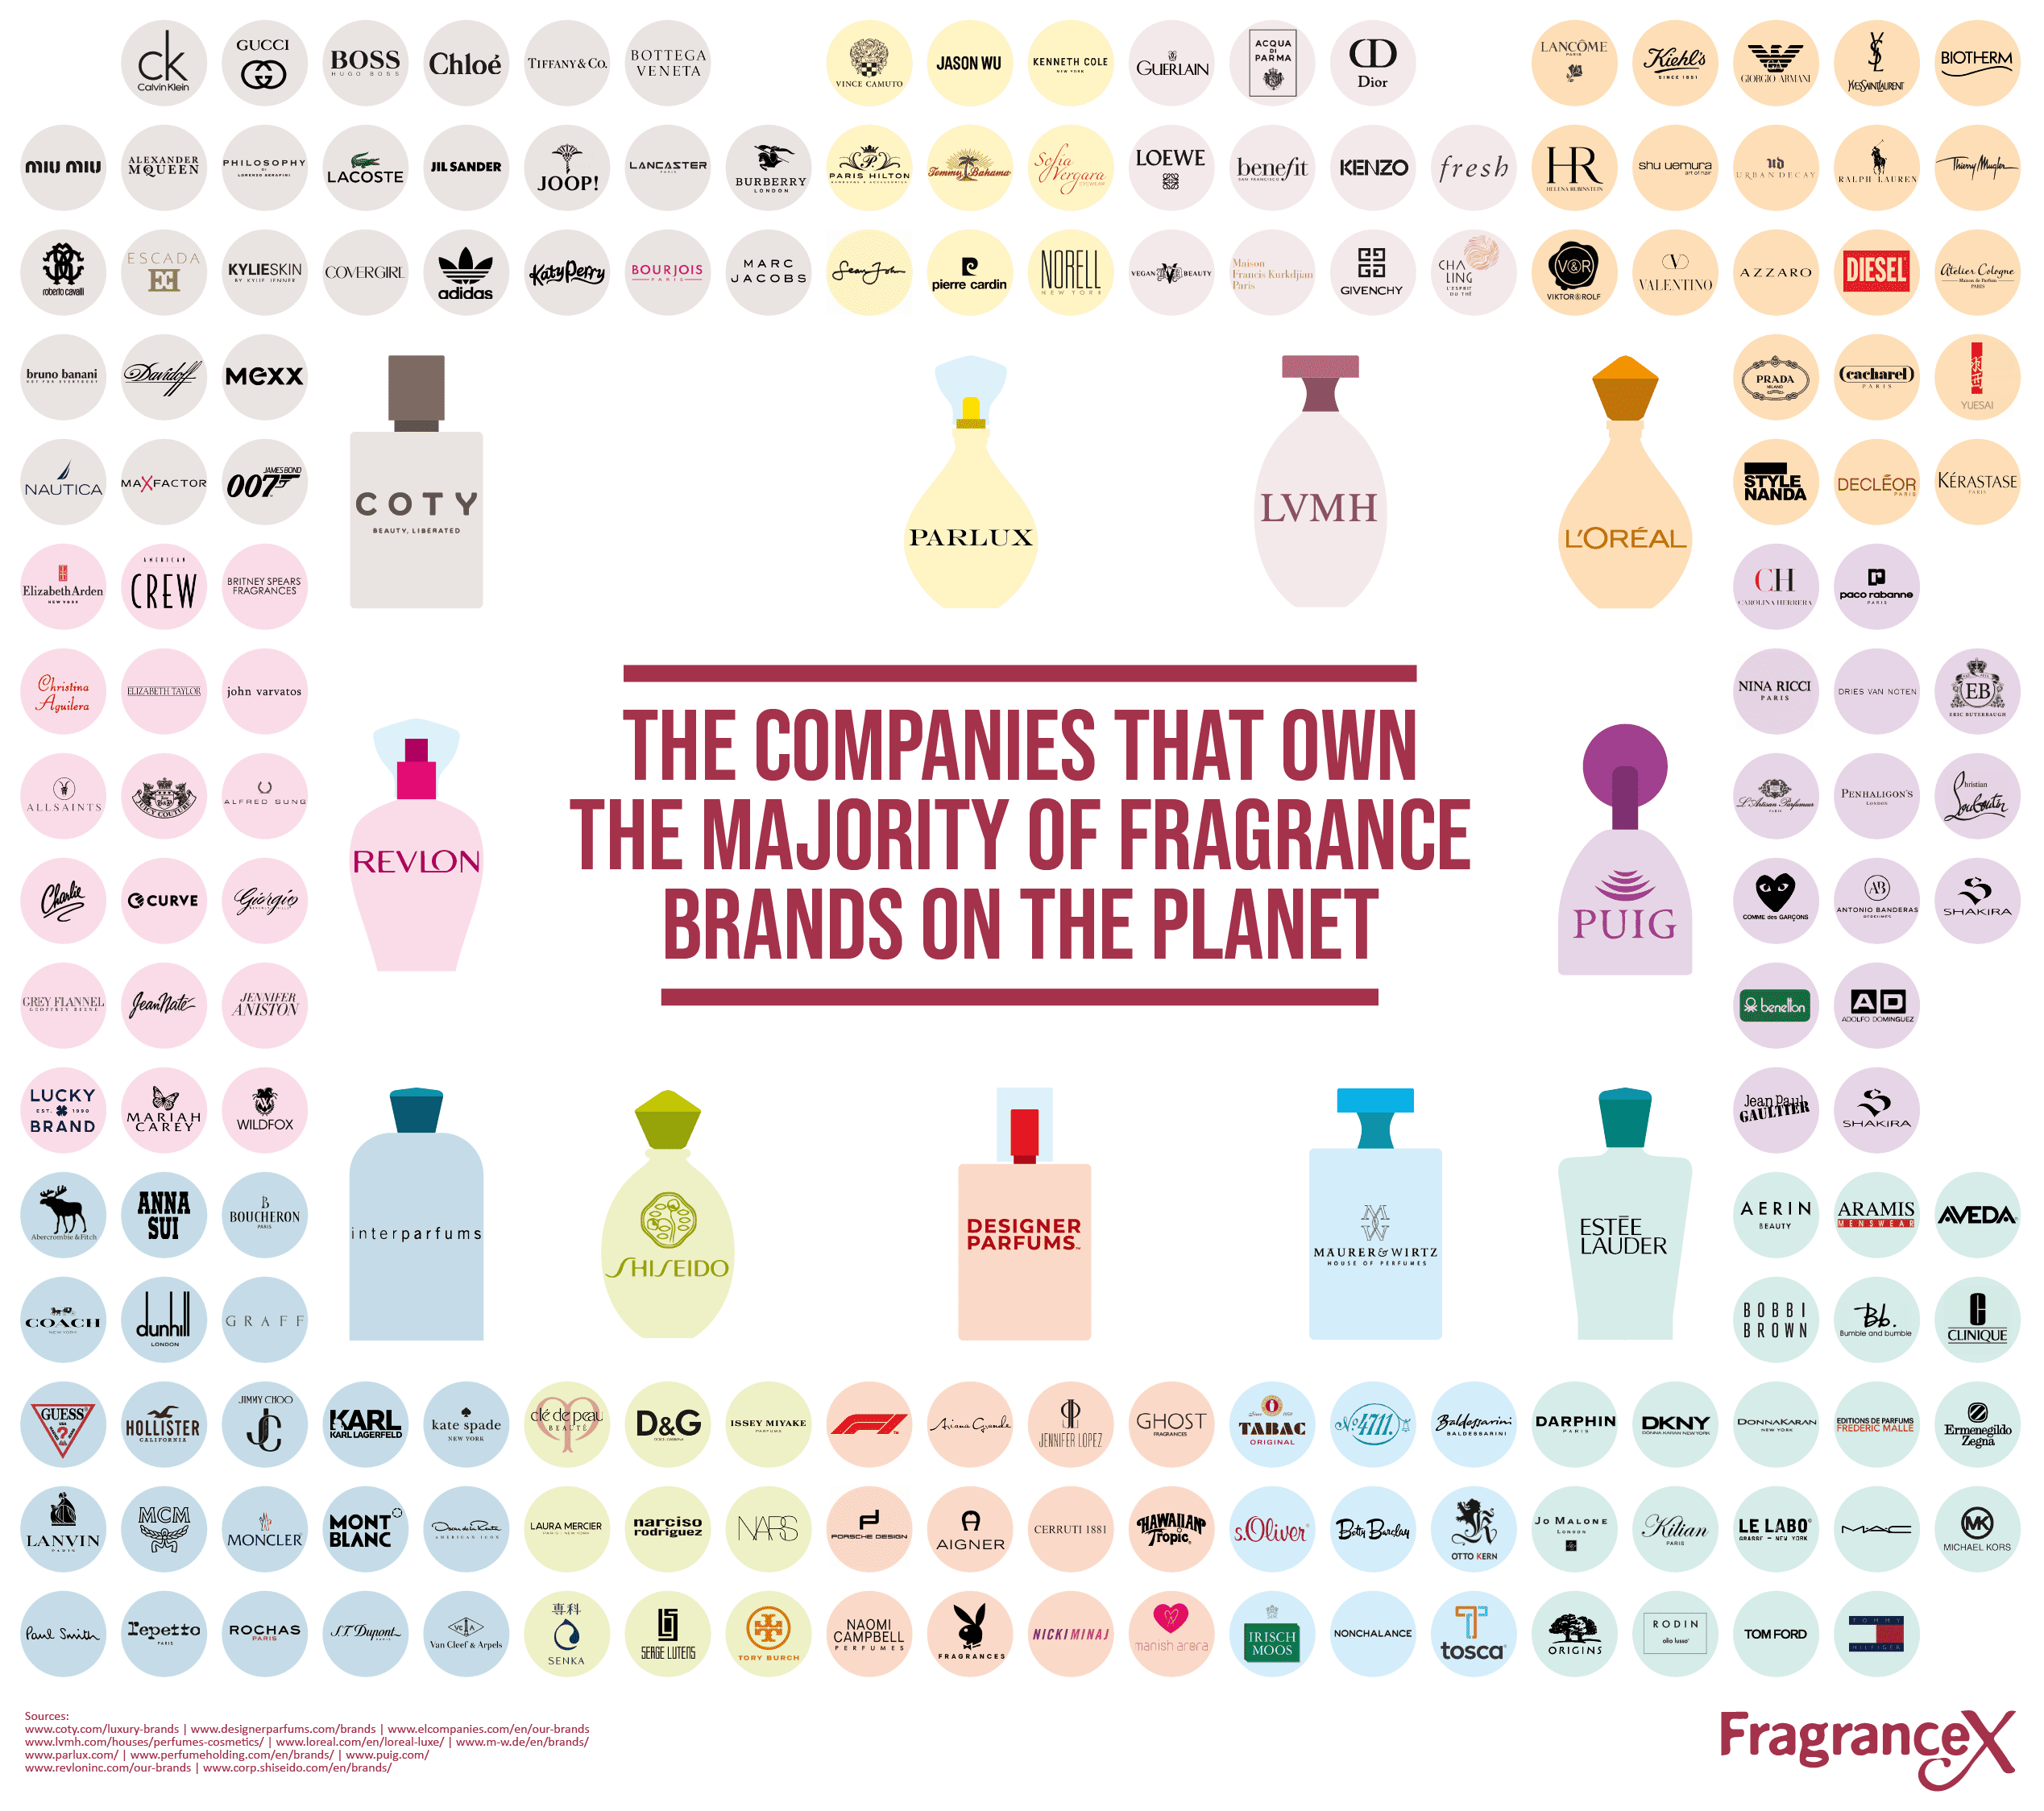 These 11 Companies That Own the Majority of Fragrance Brands on the Planet